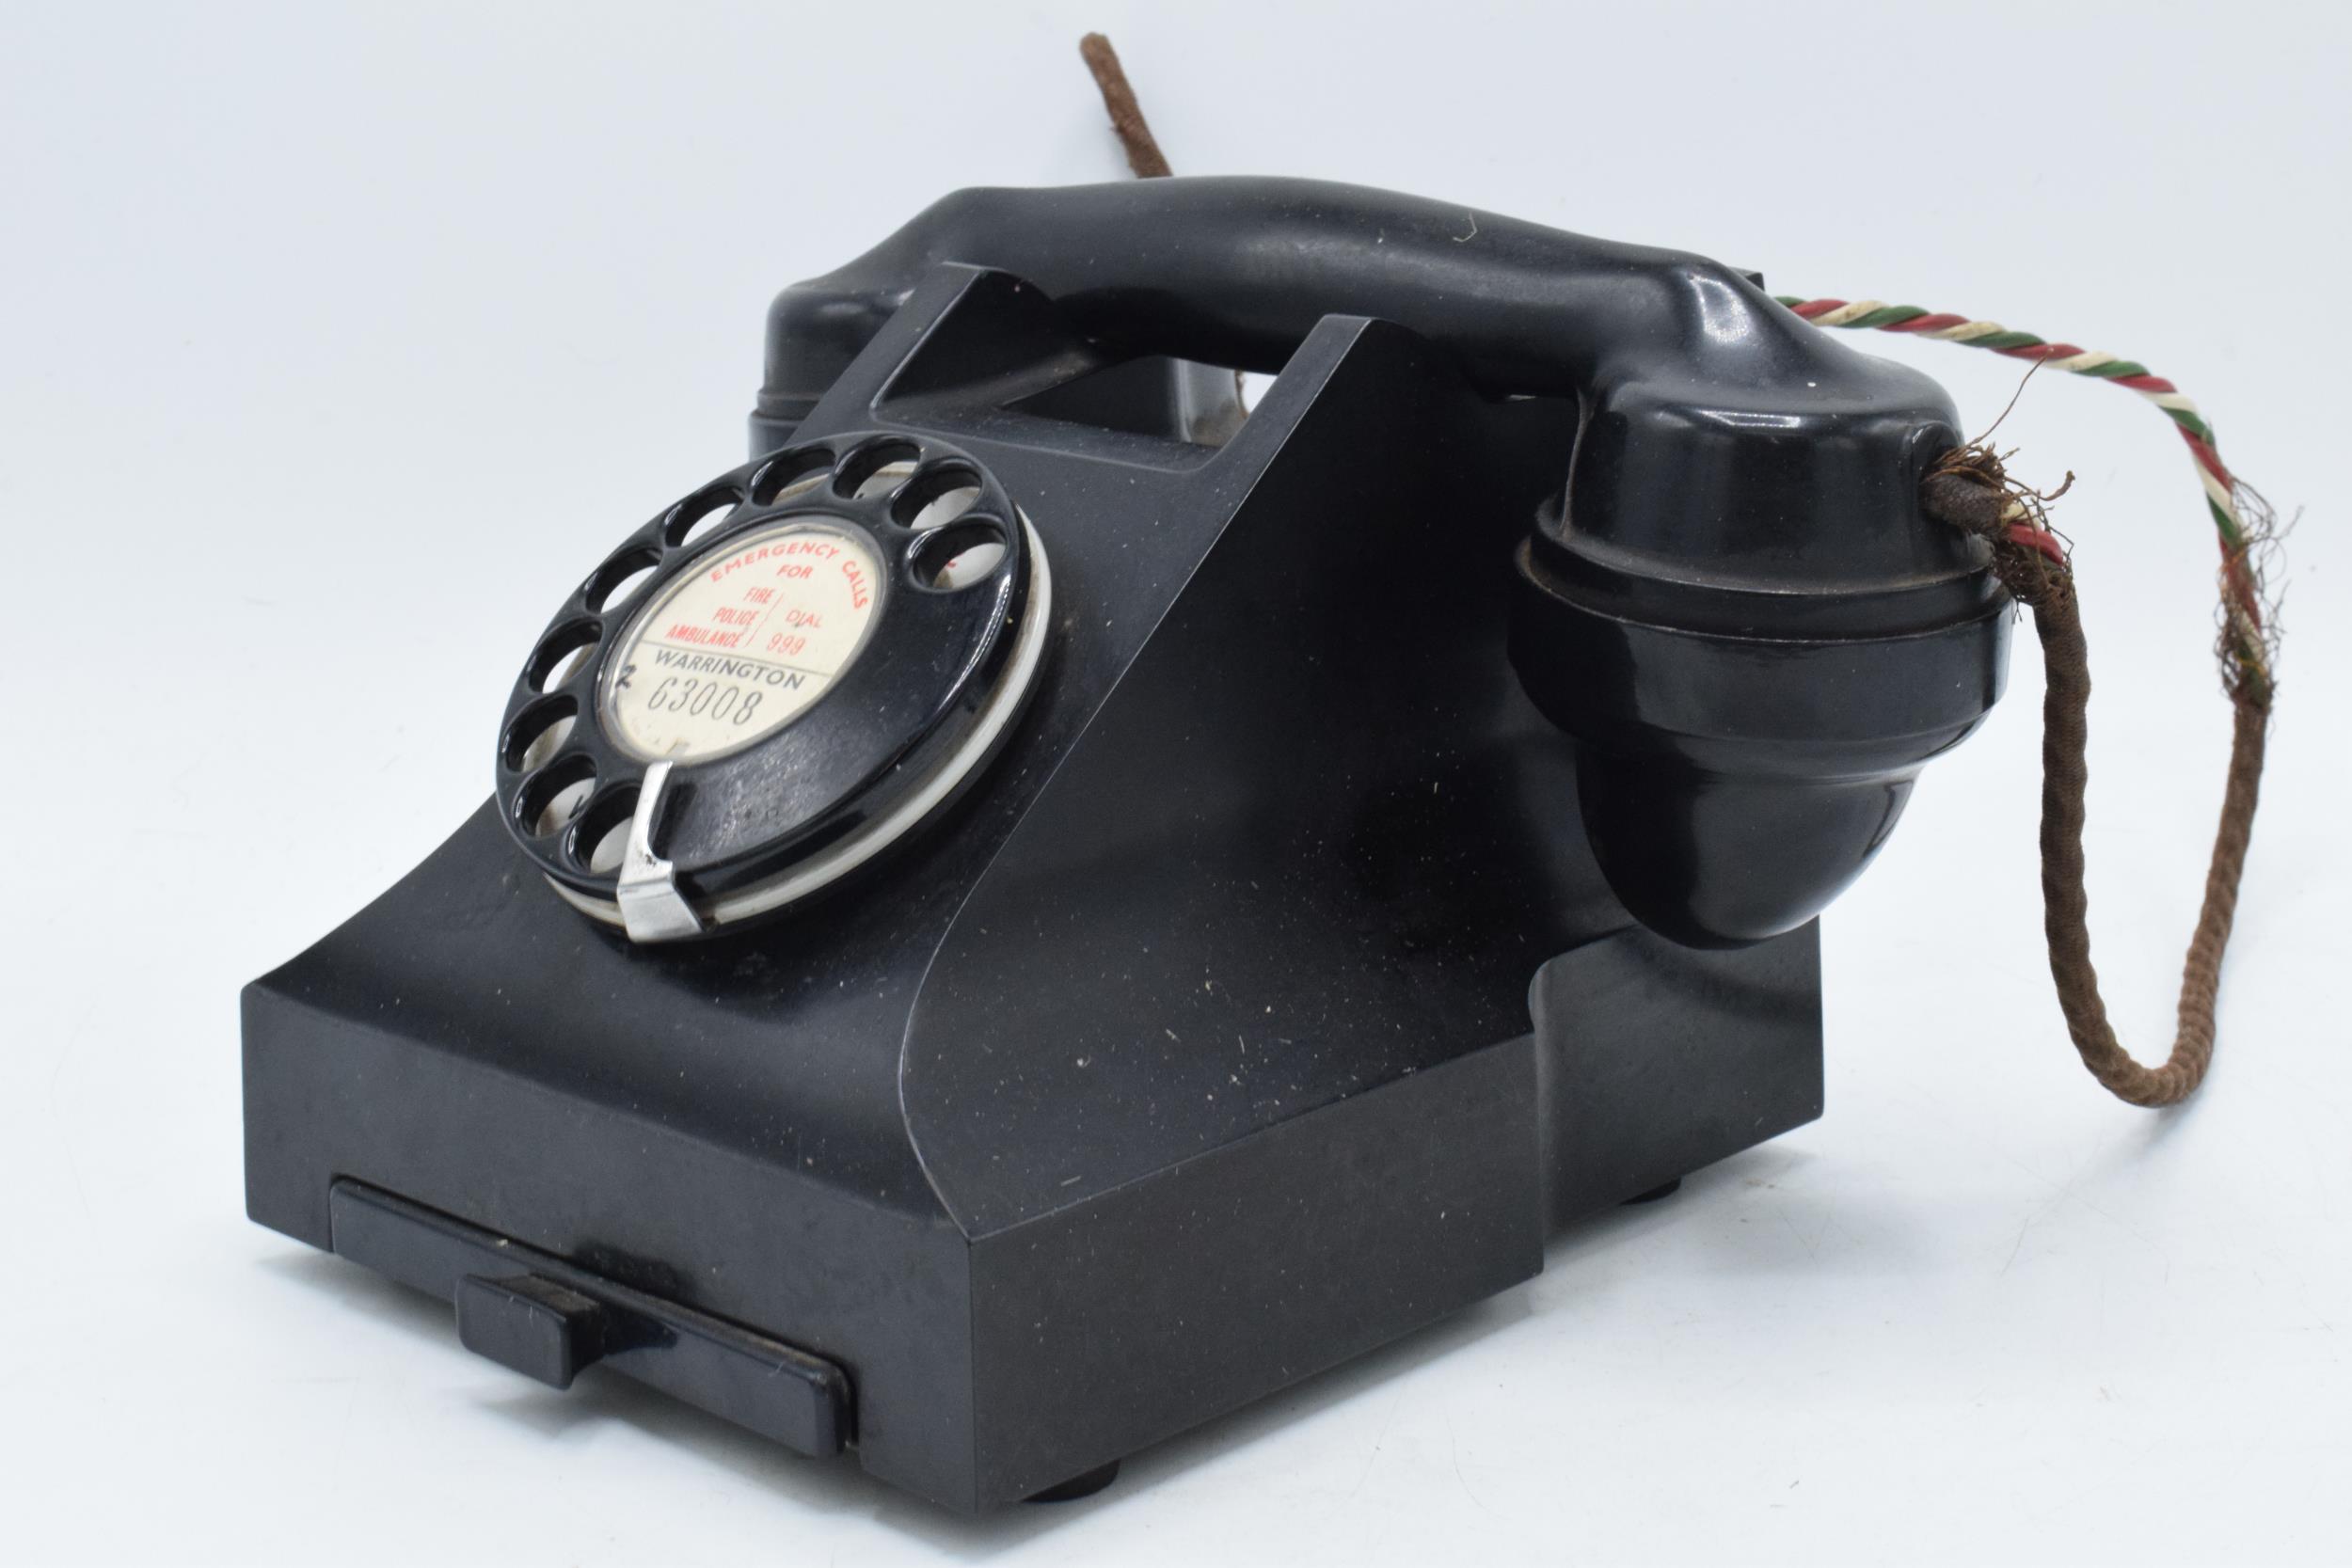 Vintage bakelite telephone and base 'Warrington', with wire. Sold as decorative. - Image 3 of 3